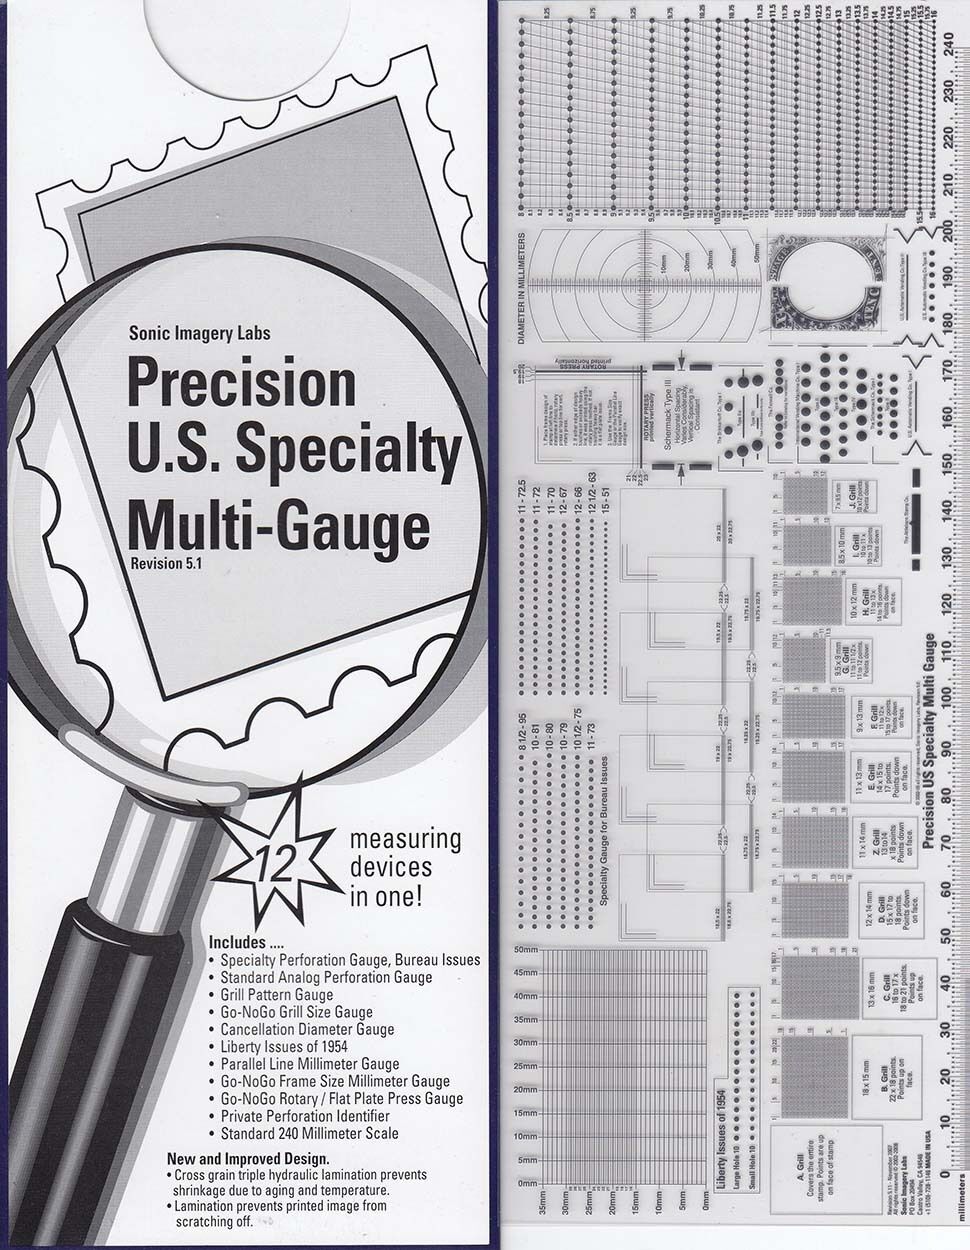 New Stamps Perforation Gauge Scott Precision US Specialty 12 in 1 Multi GO no GO Precision U.S USSMG02